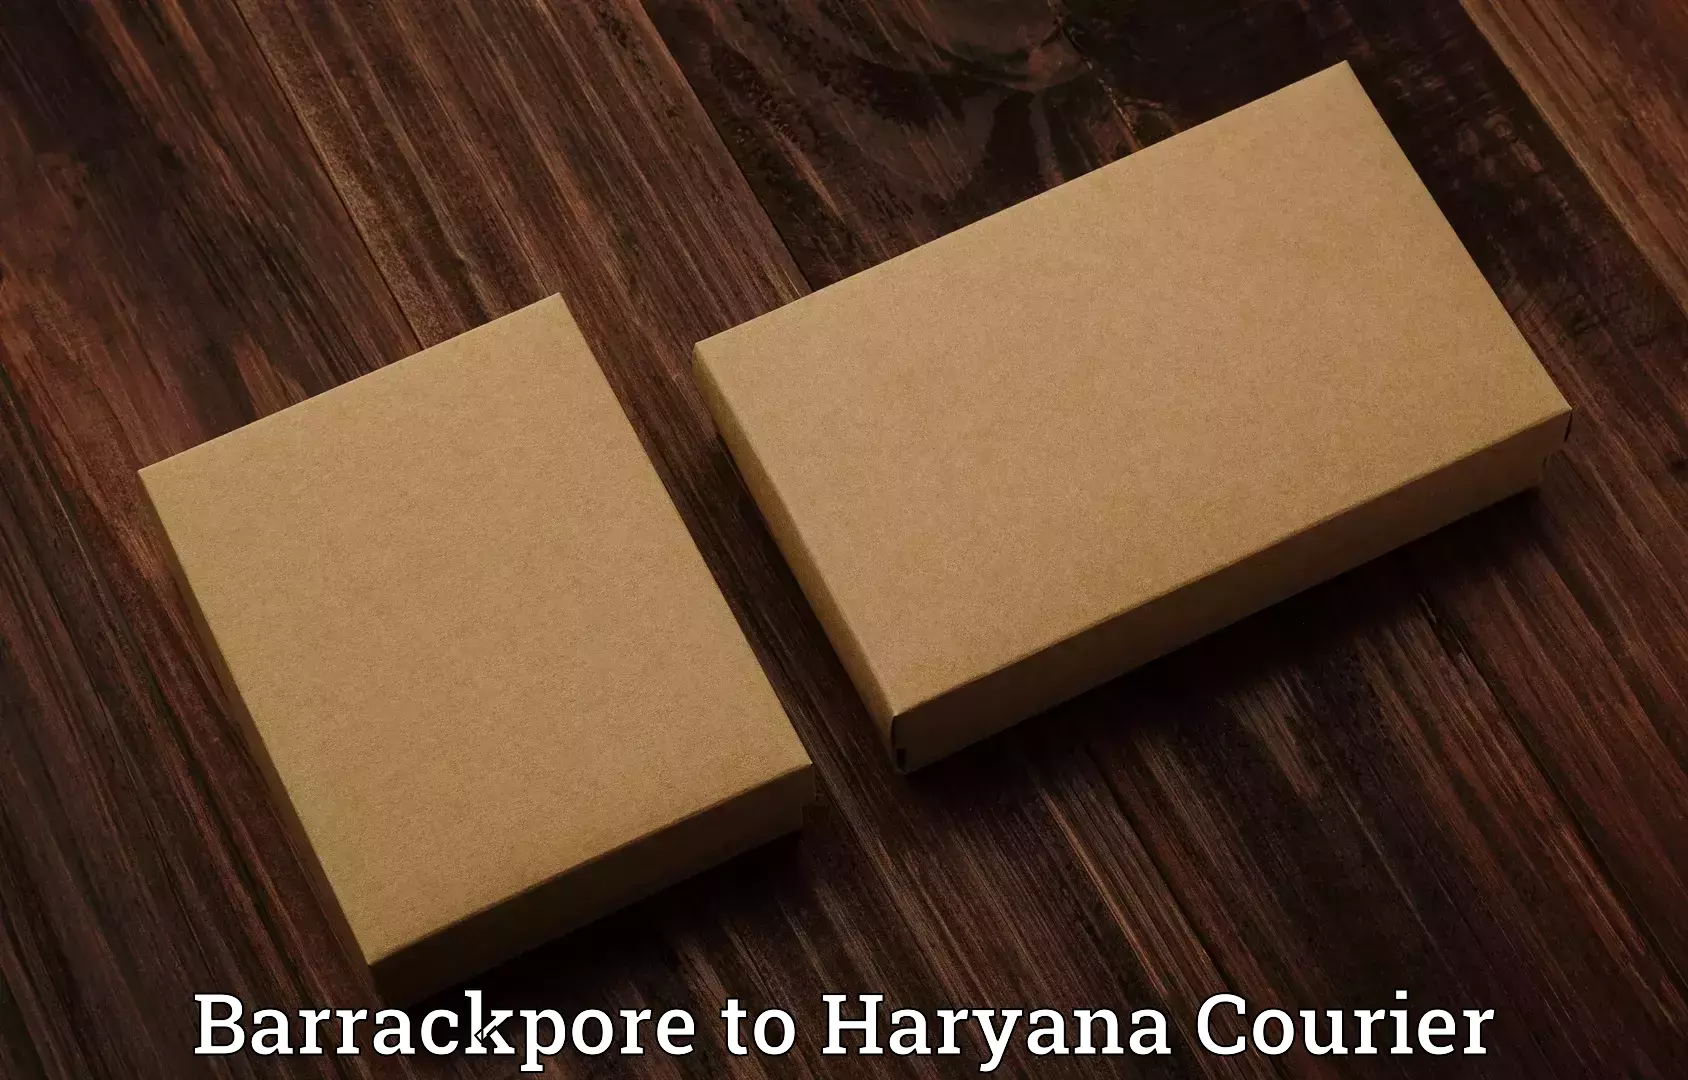 Hassle-free luggage shipping in Barrackpore to Haryana